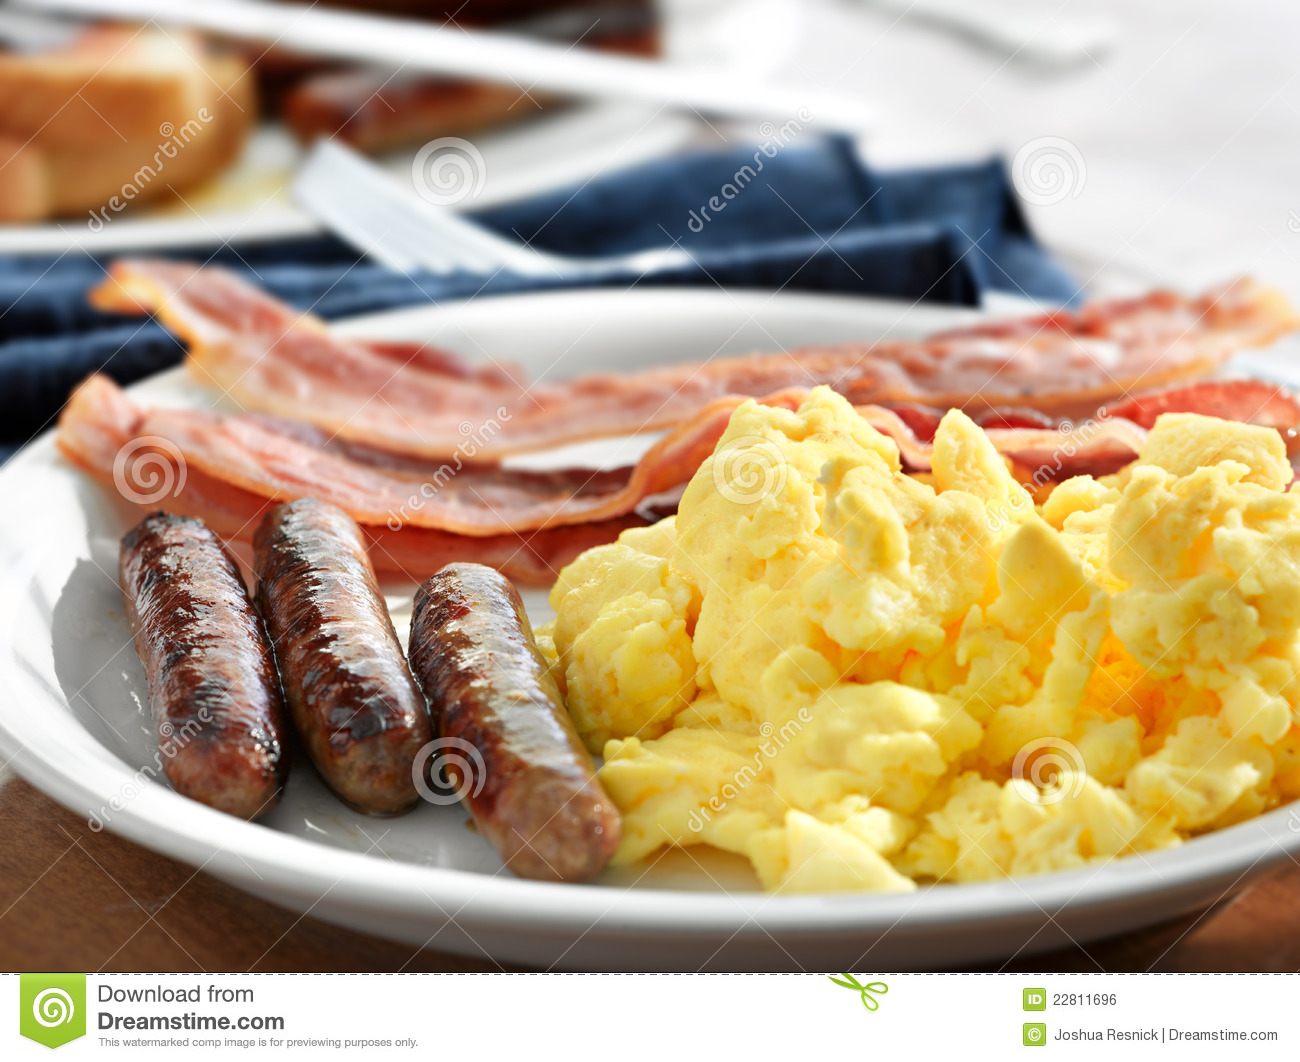 Breakfast Meal With Sausage And Scrambled Eggs With Bacon Shot With